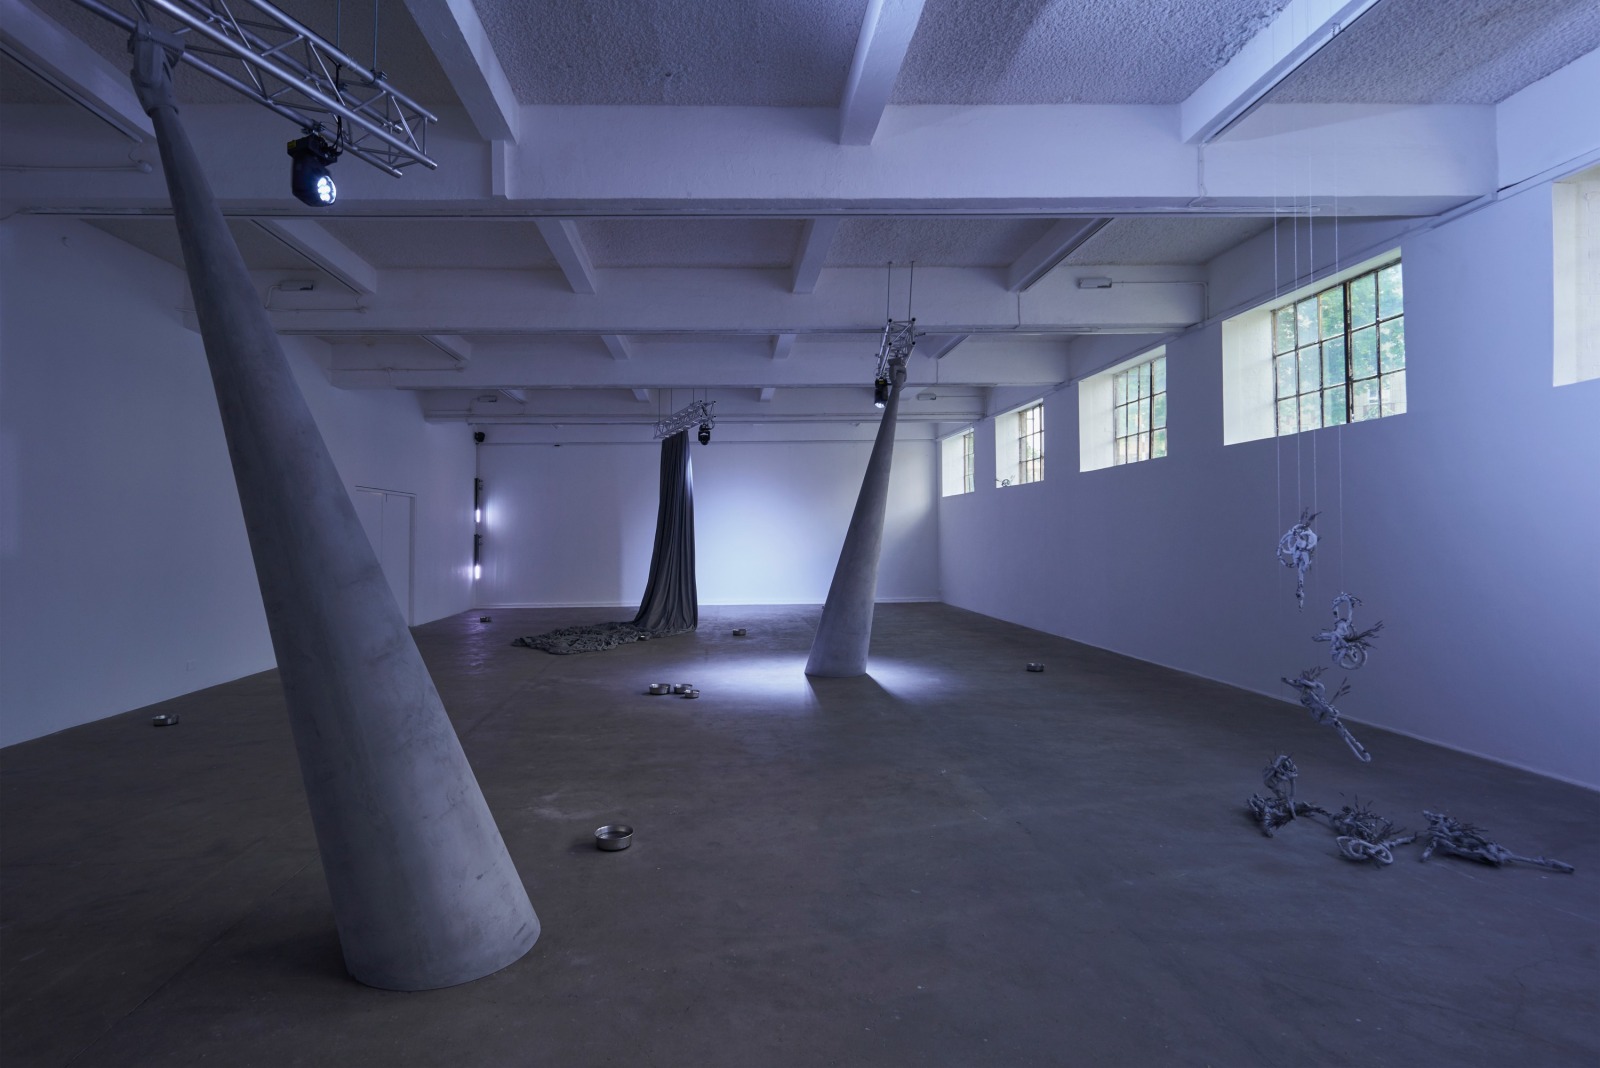 Installation view, Nikita Gale, IN A DREAM YOU CLIMB THE STAIRS, Chisenhale, London, 2022